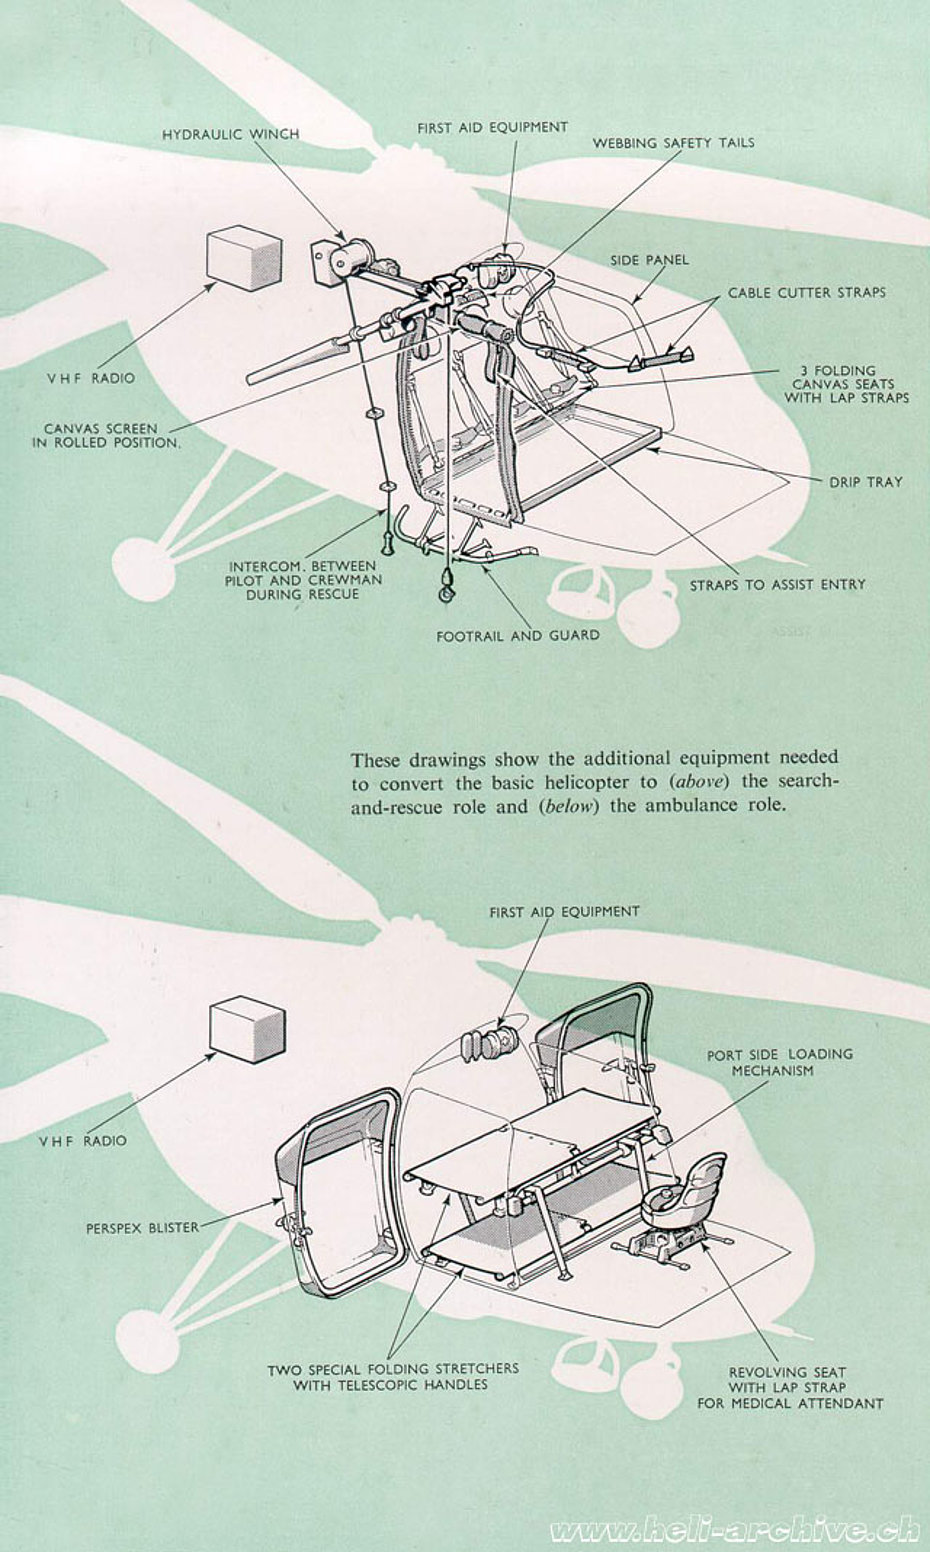 These drawings show the additional equipment needed to convert the basic helicopter to (above) the SAR role and (below) the ambulance role (HAB)